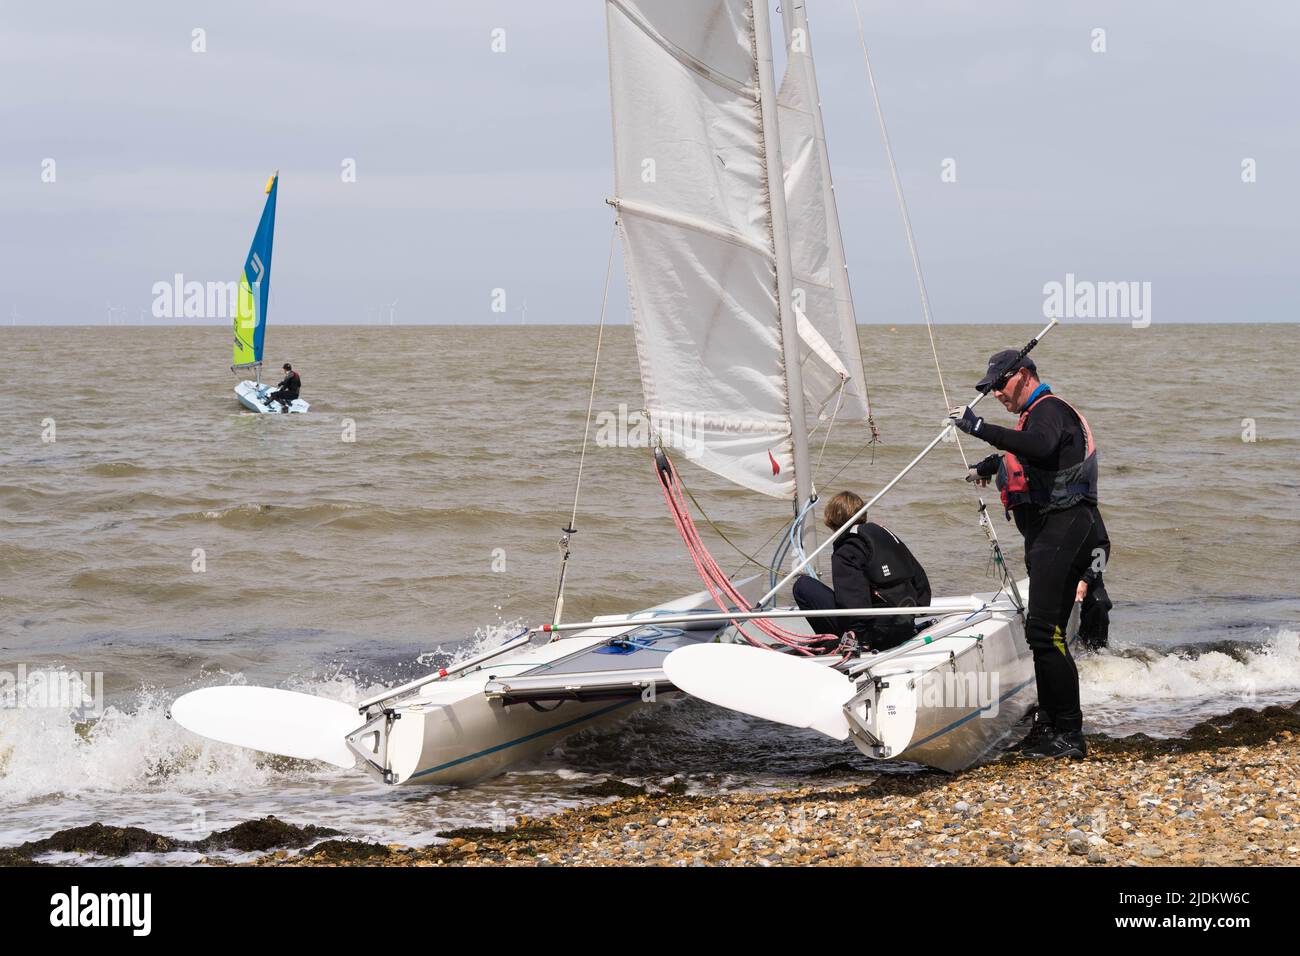 Tankerton 60 minutes sailing race 'Commodore 3 & 4' took place under choppy water on a windy summer afternoon today Stock Photo